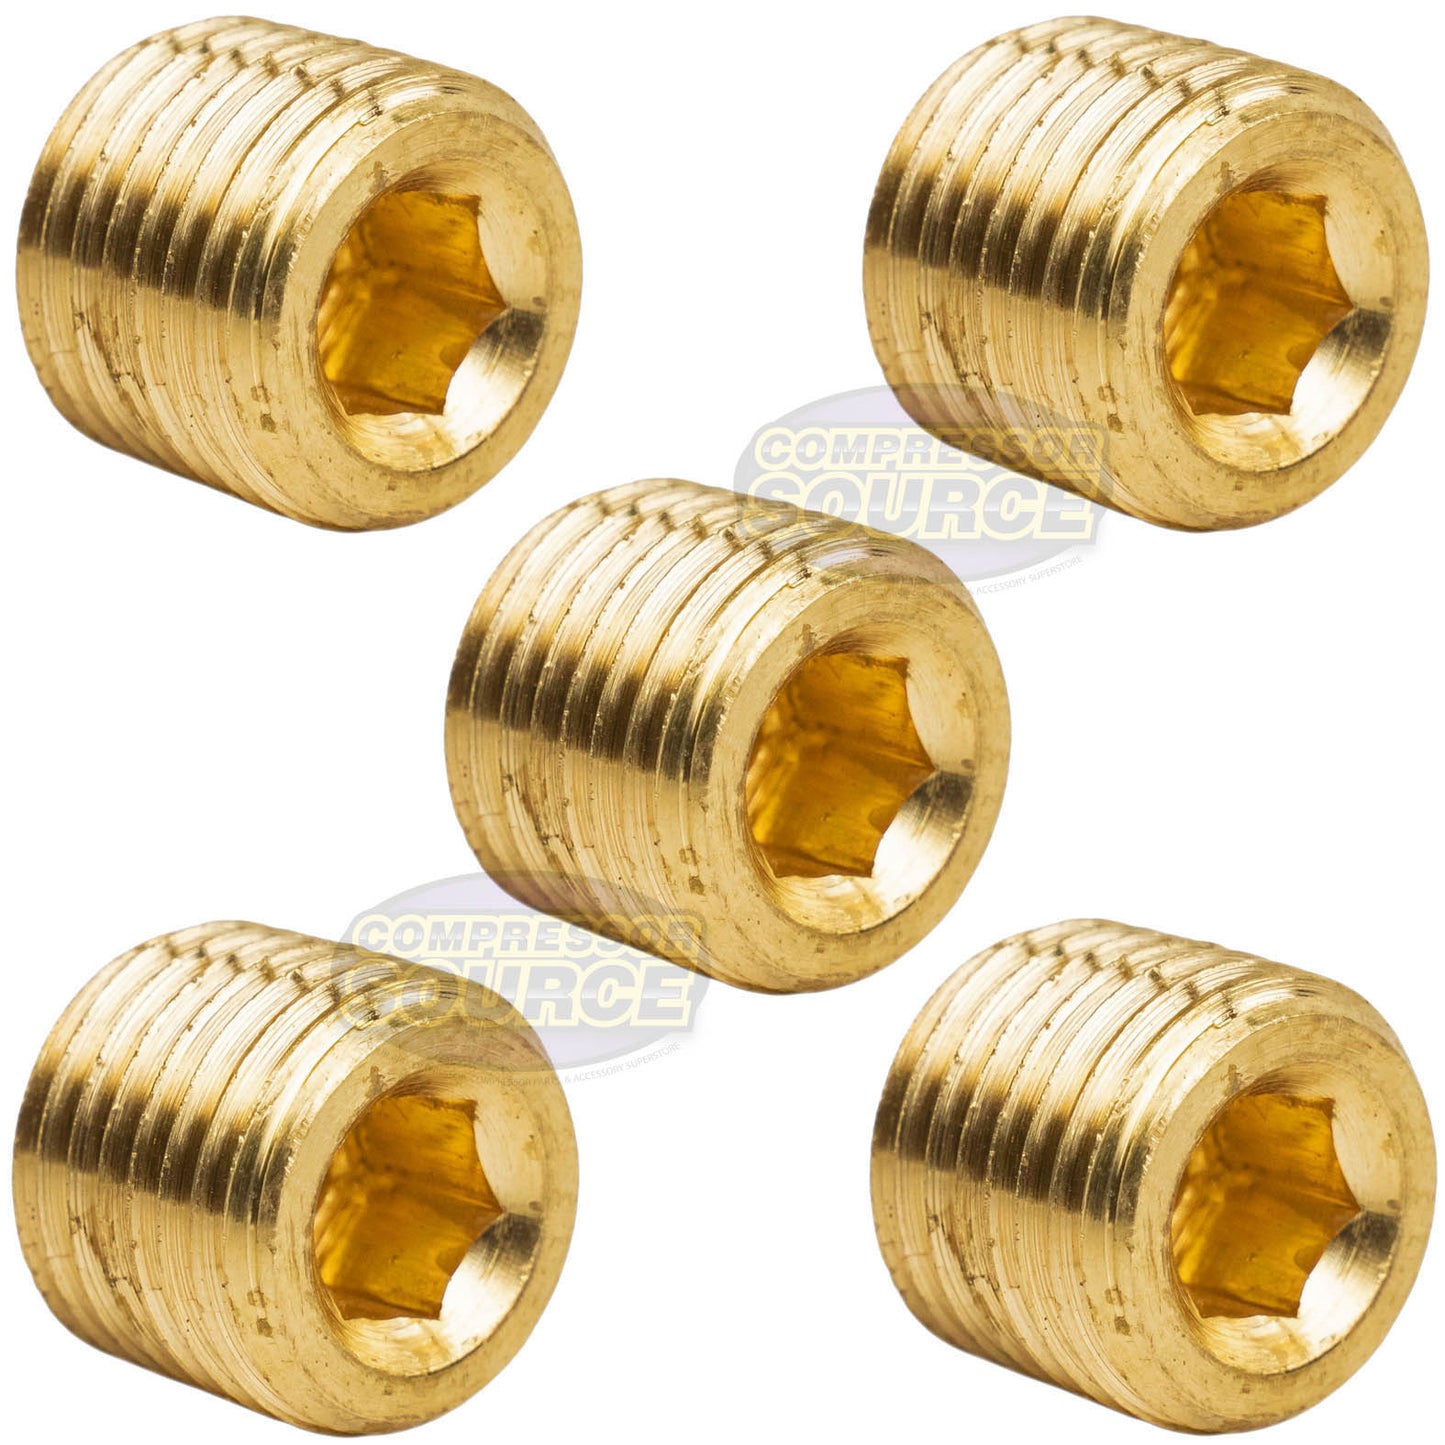 5 Pack Brass 1/4" Hex Pipe Plugs Countersunk Style Male NPT Pipe End Fitting Cap